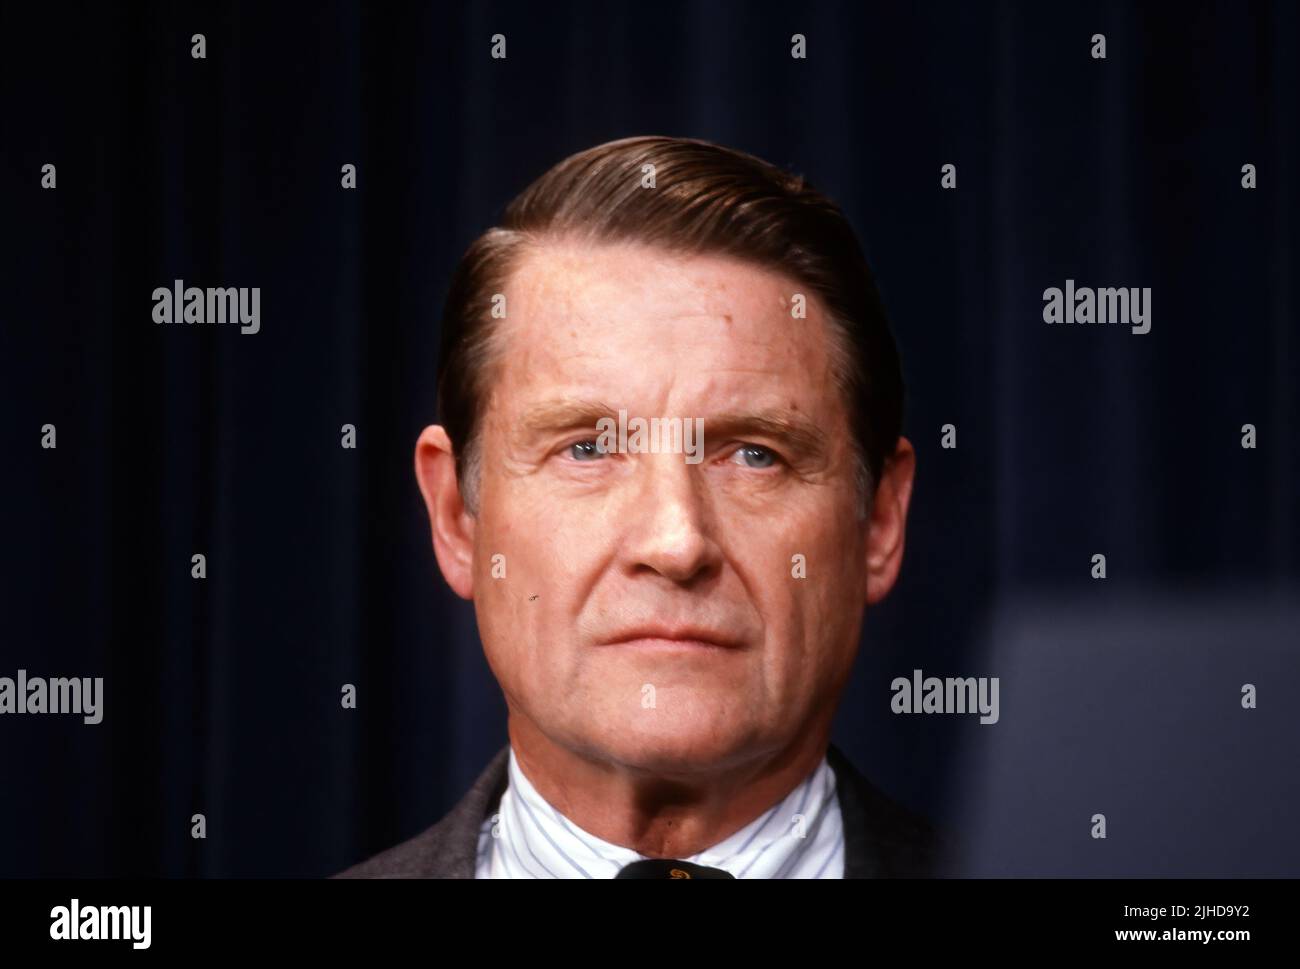 WASHINGTON DC - DECEMBER 6, 1988 William H. Webster is asked by President-Elect George H.W. Bush to stay on as the Director of the Central Intelligence during a news conference in room 450 of the Old Executive Office Building where Bush introduced his new cabinet officers to the news media. Stock Photo